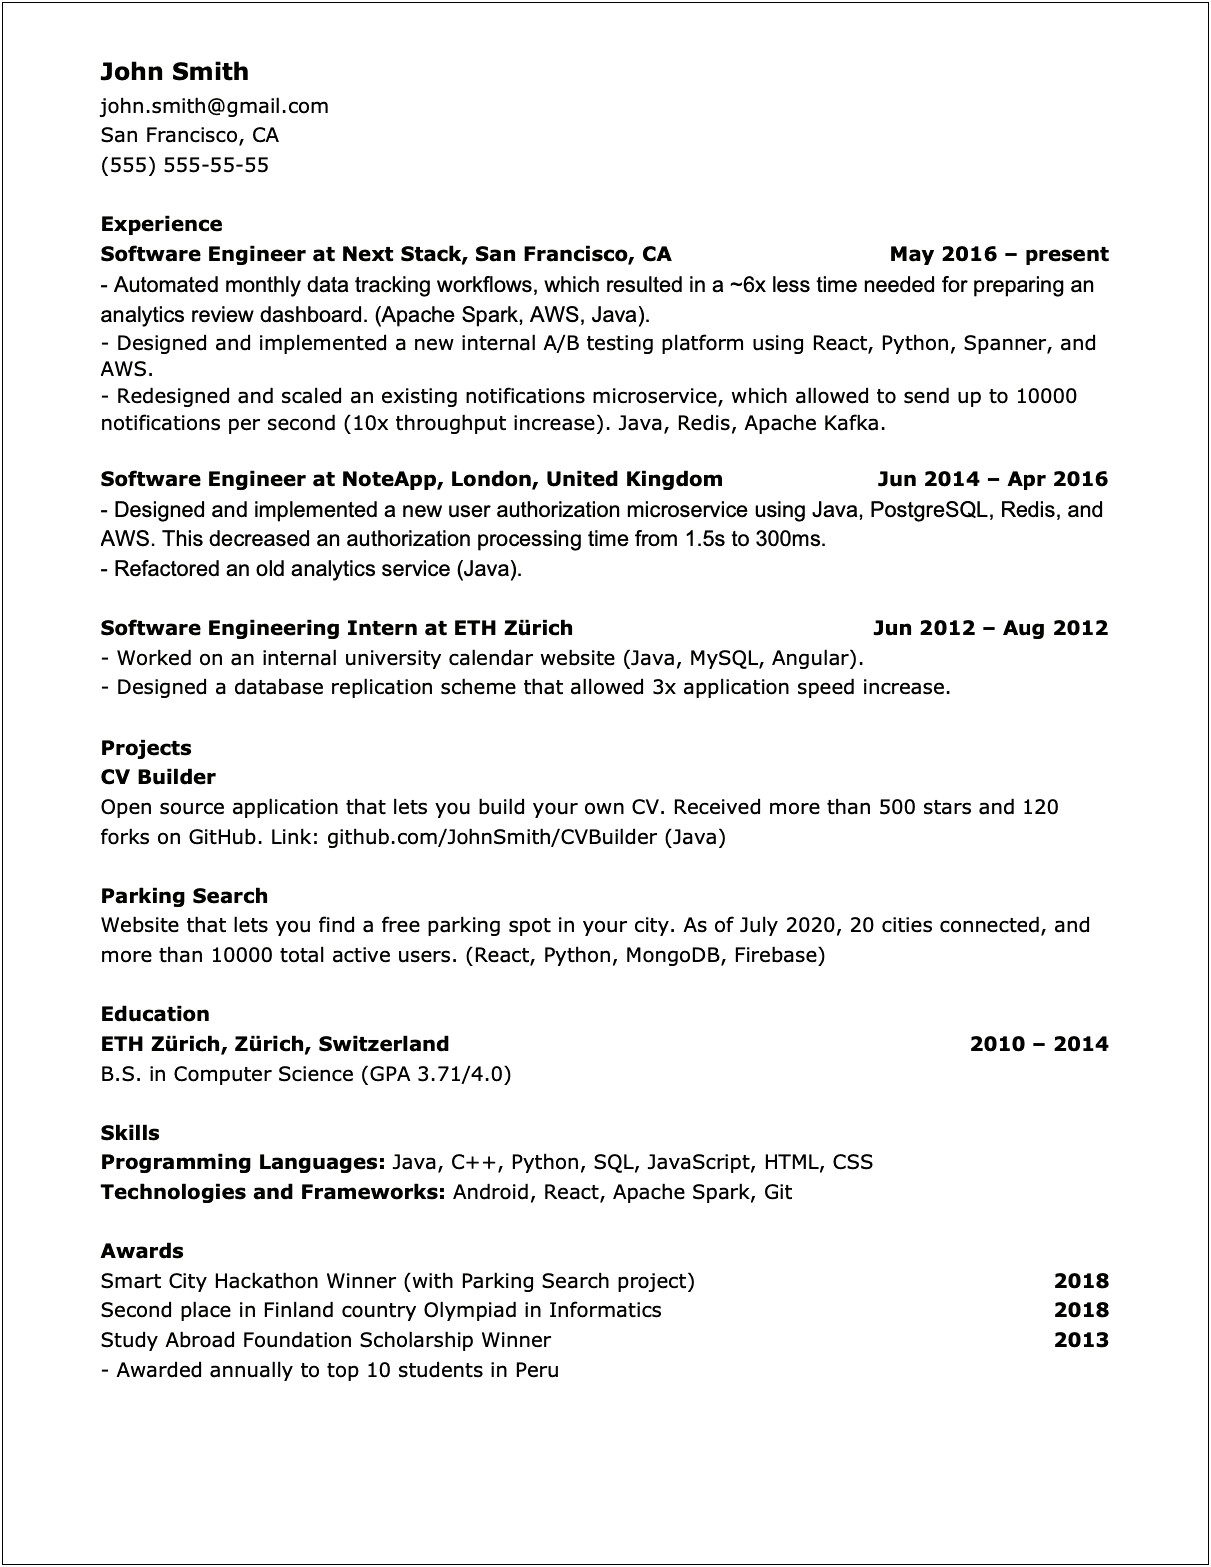 Resume With Study Abroad Experience Sample